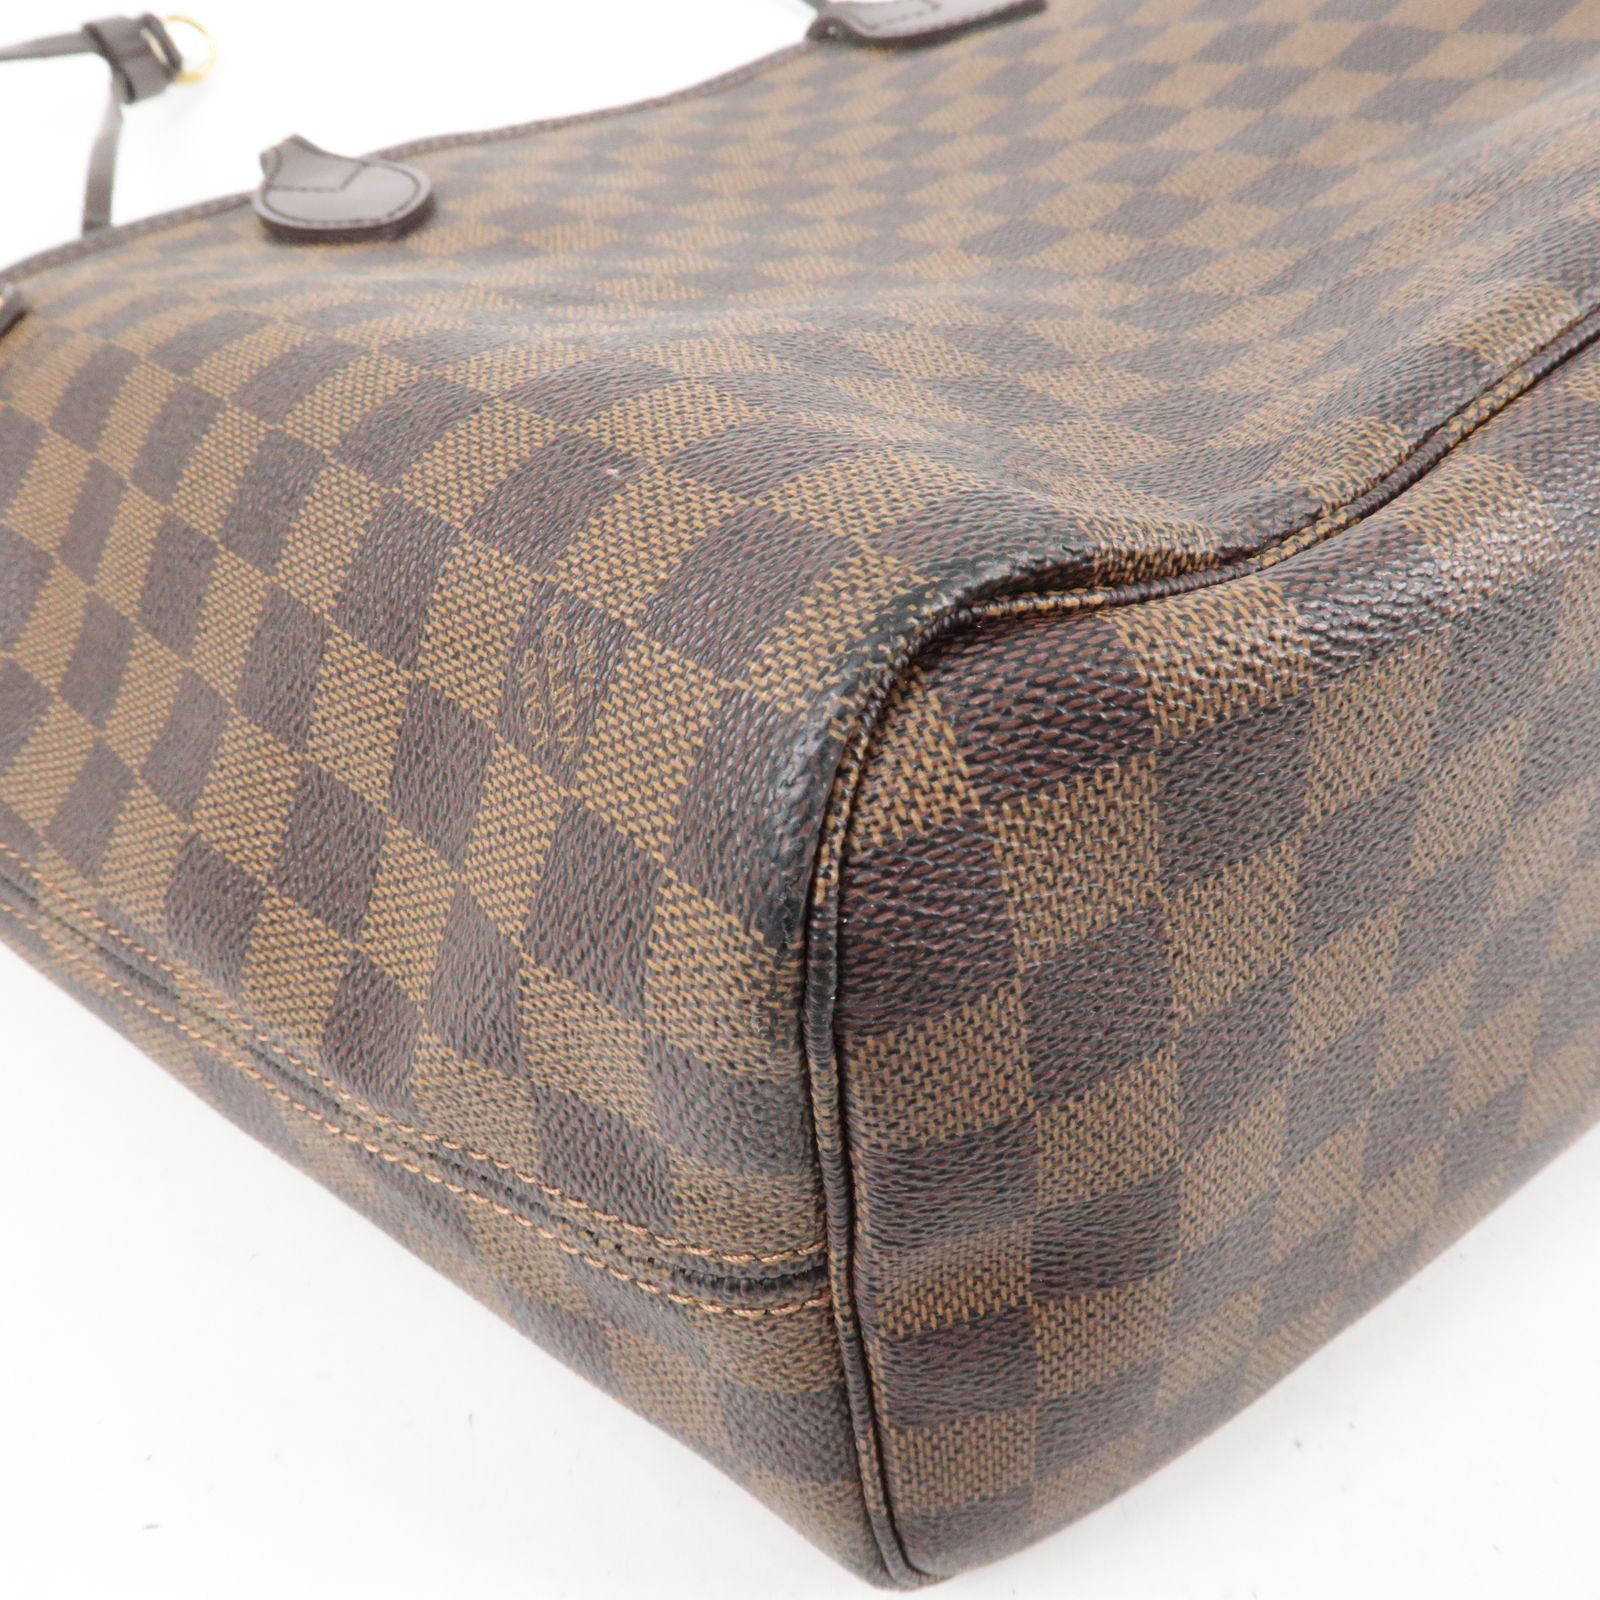 Louis Vuitton 2011 Pre-owned Neverfull GM Tote Bag